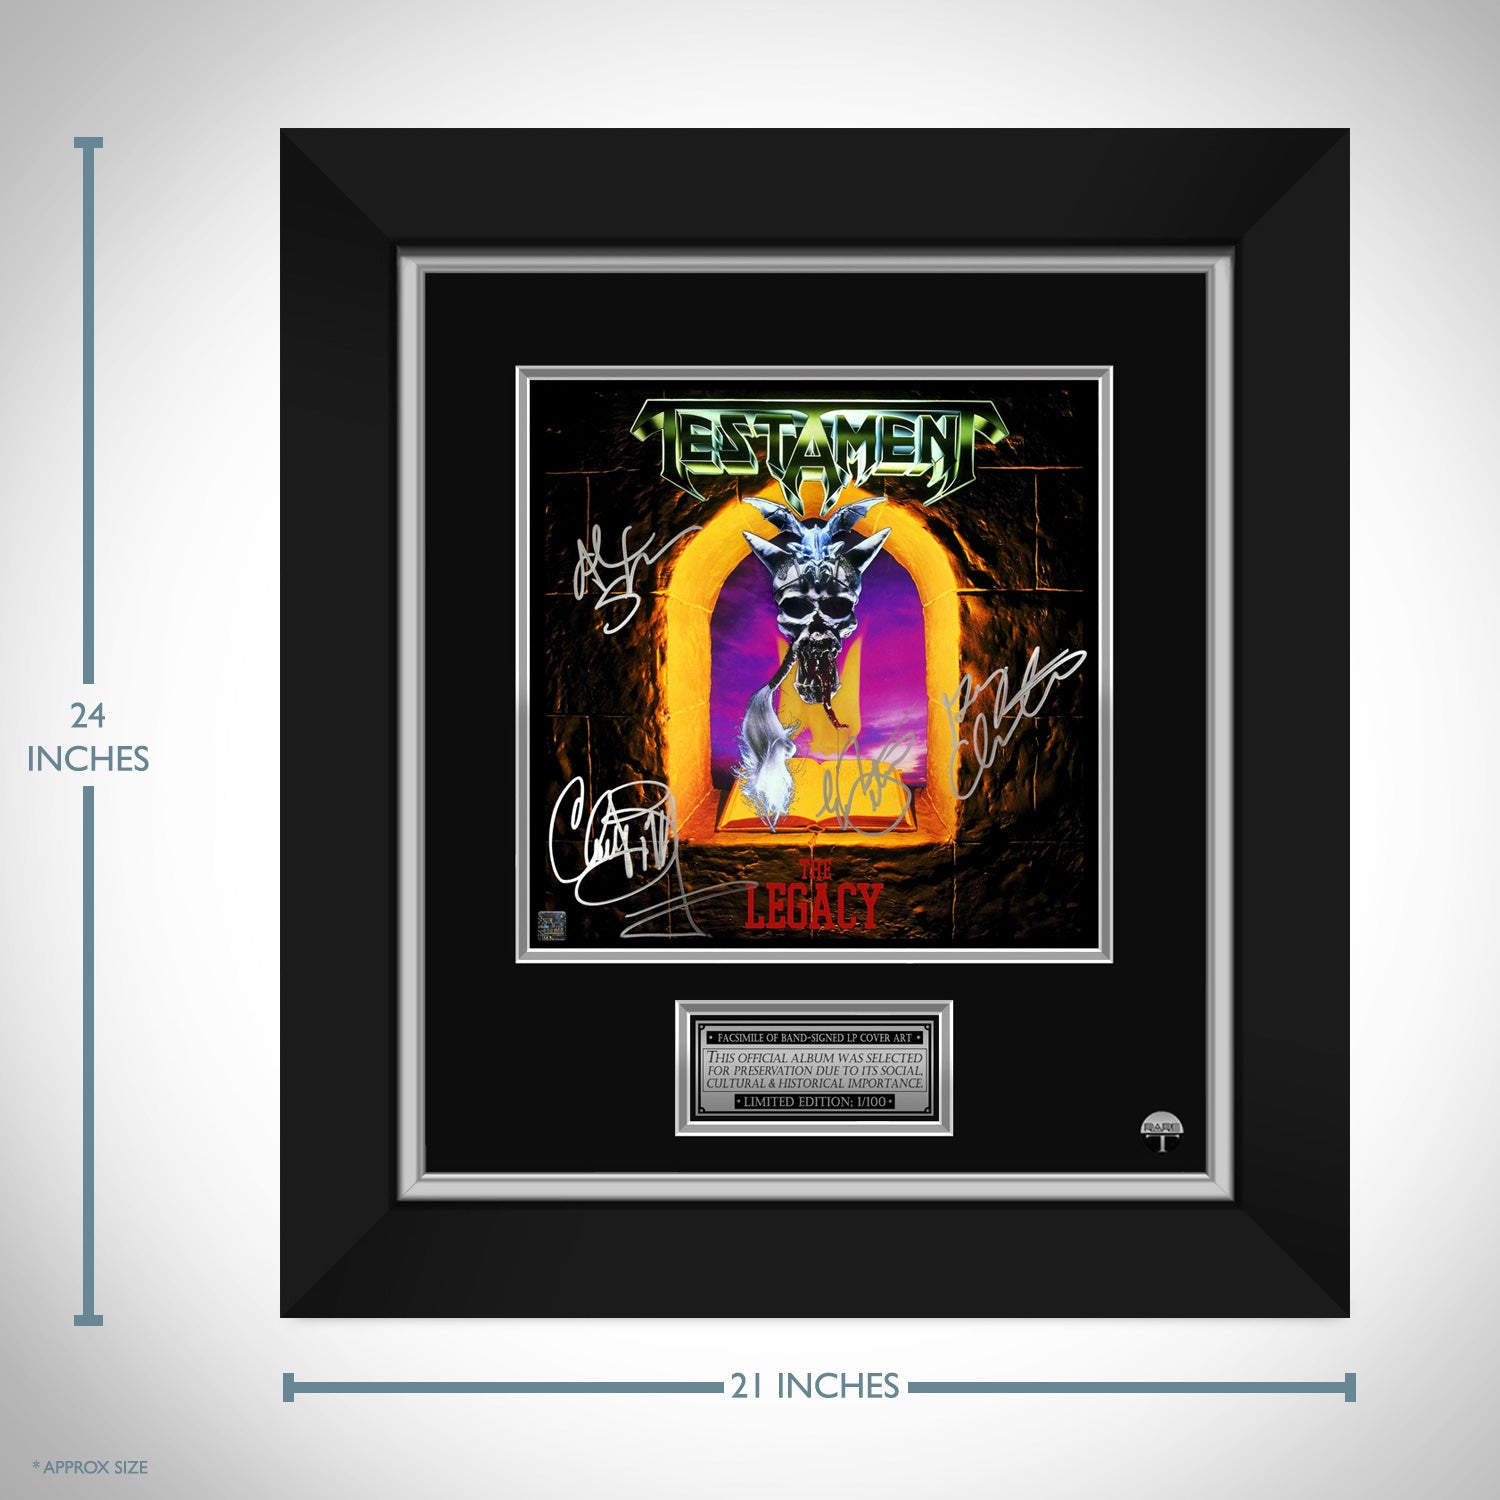 Testament - The Legacy Limited Signature Edition LP Cover Custom